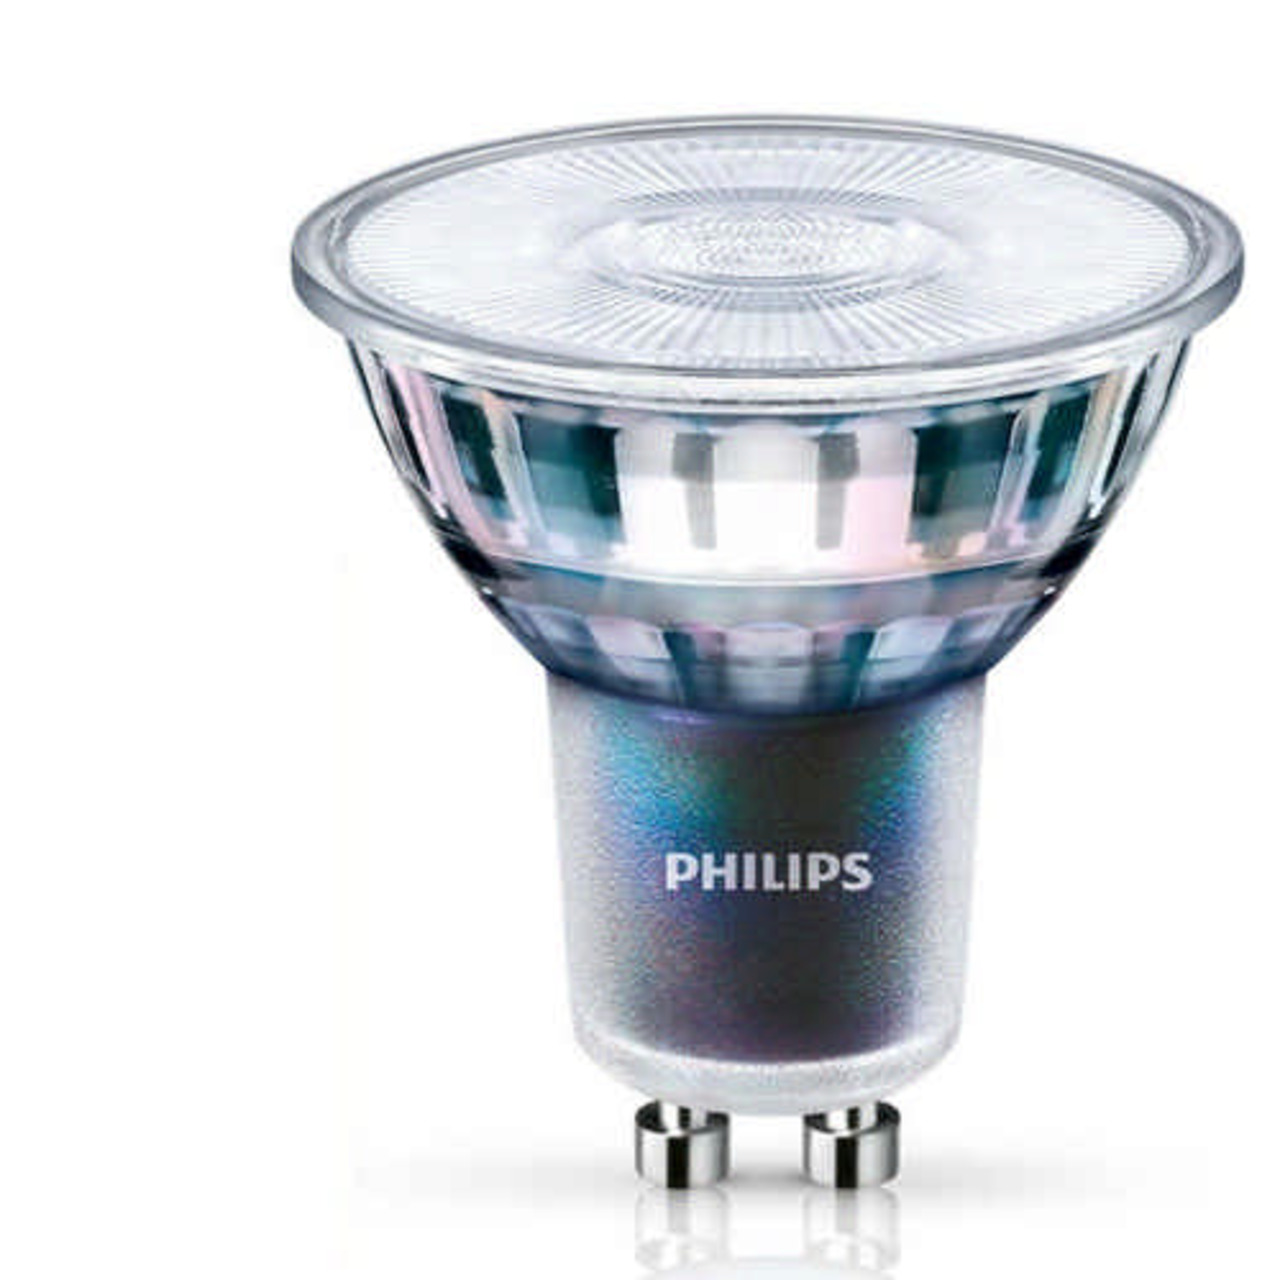 Philips MASTER ExpertColor 5-5-W-GU10-LED-Lampe- 375 lm- 97 Ra- 36- 3000K- warmweiss- dimmbar